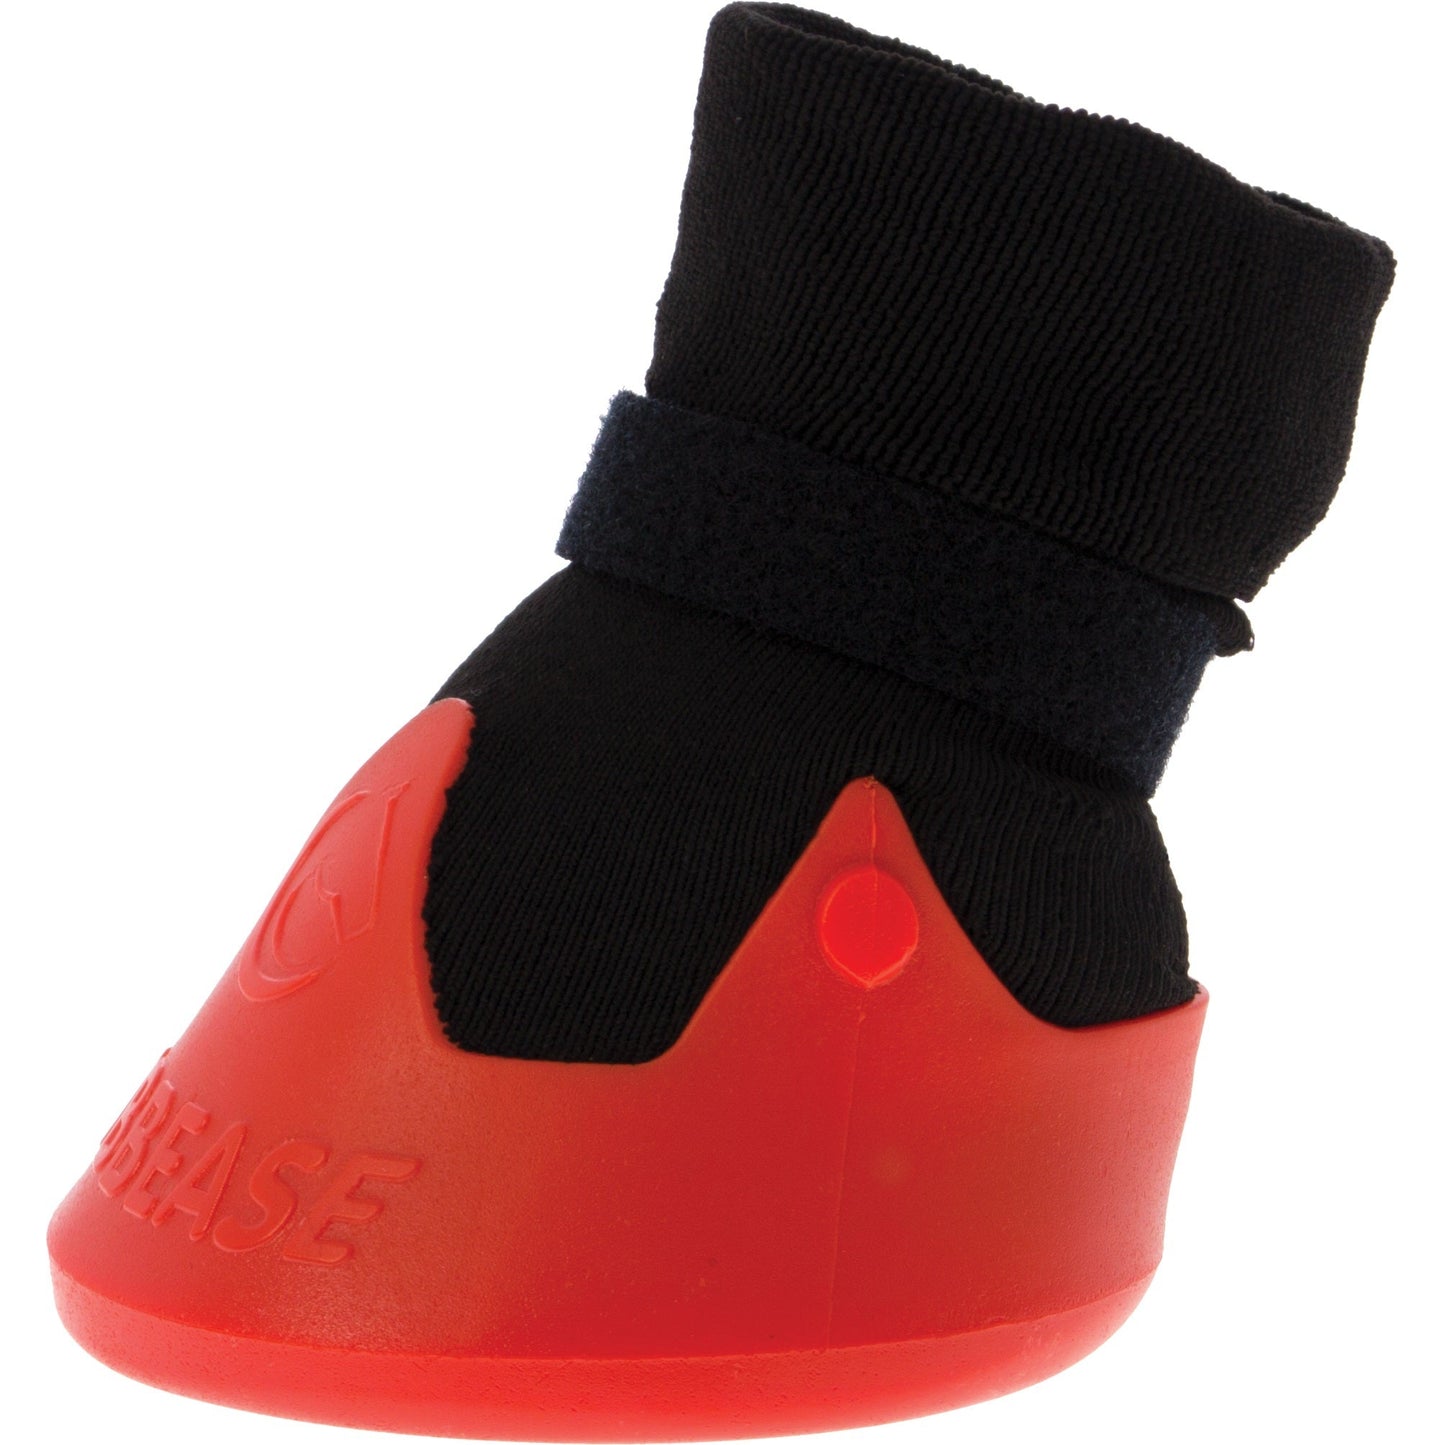 A red and black rubber horse hoof boot with a velcro strap against a white background.